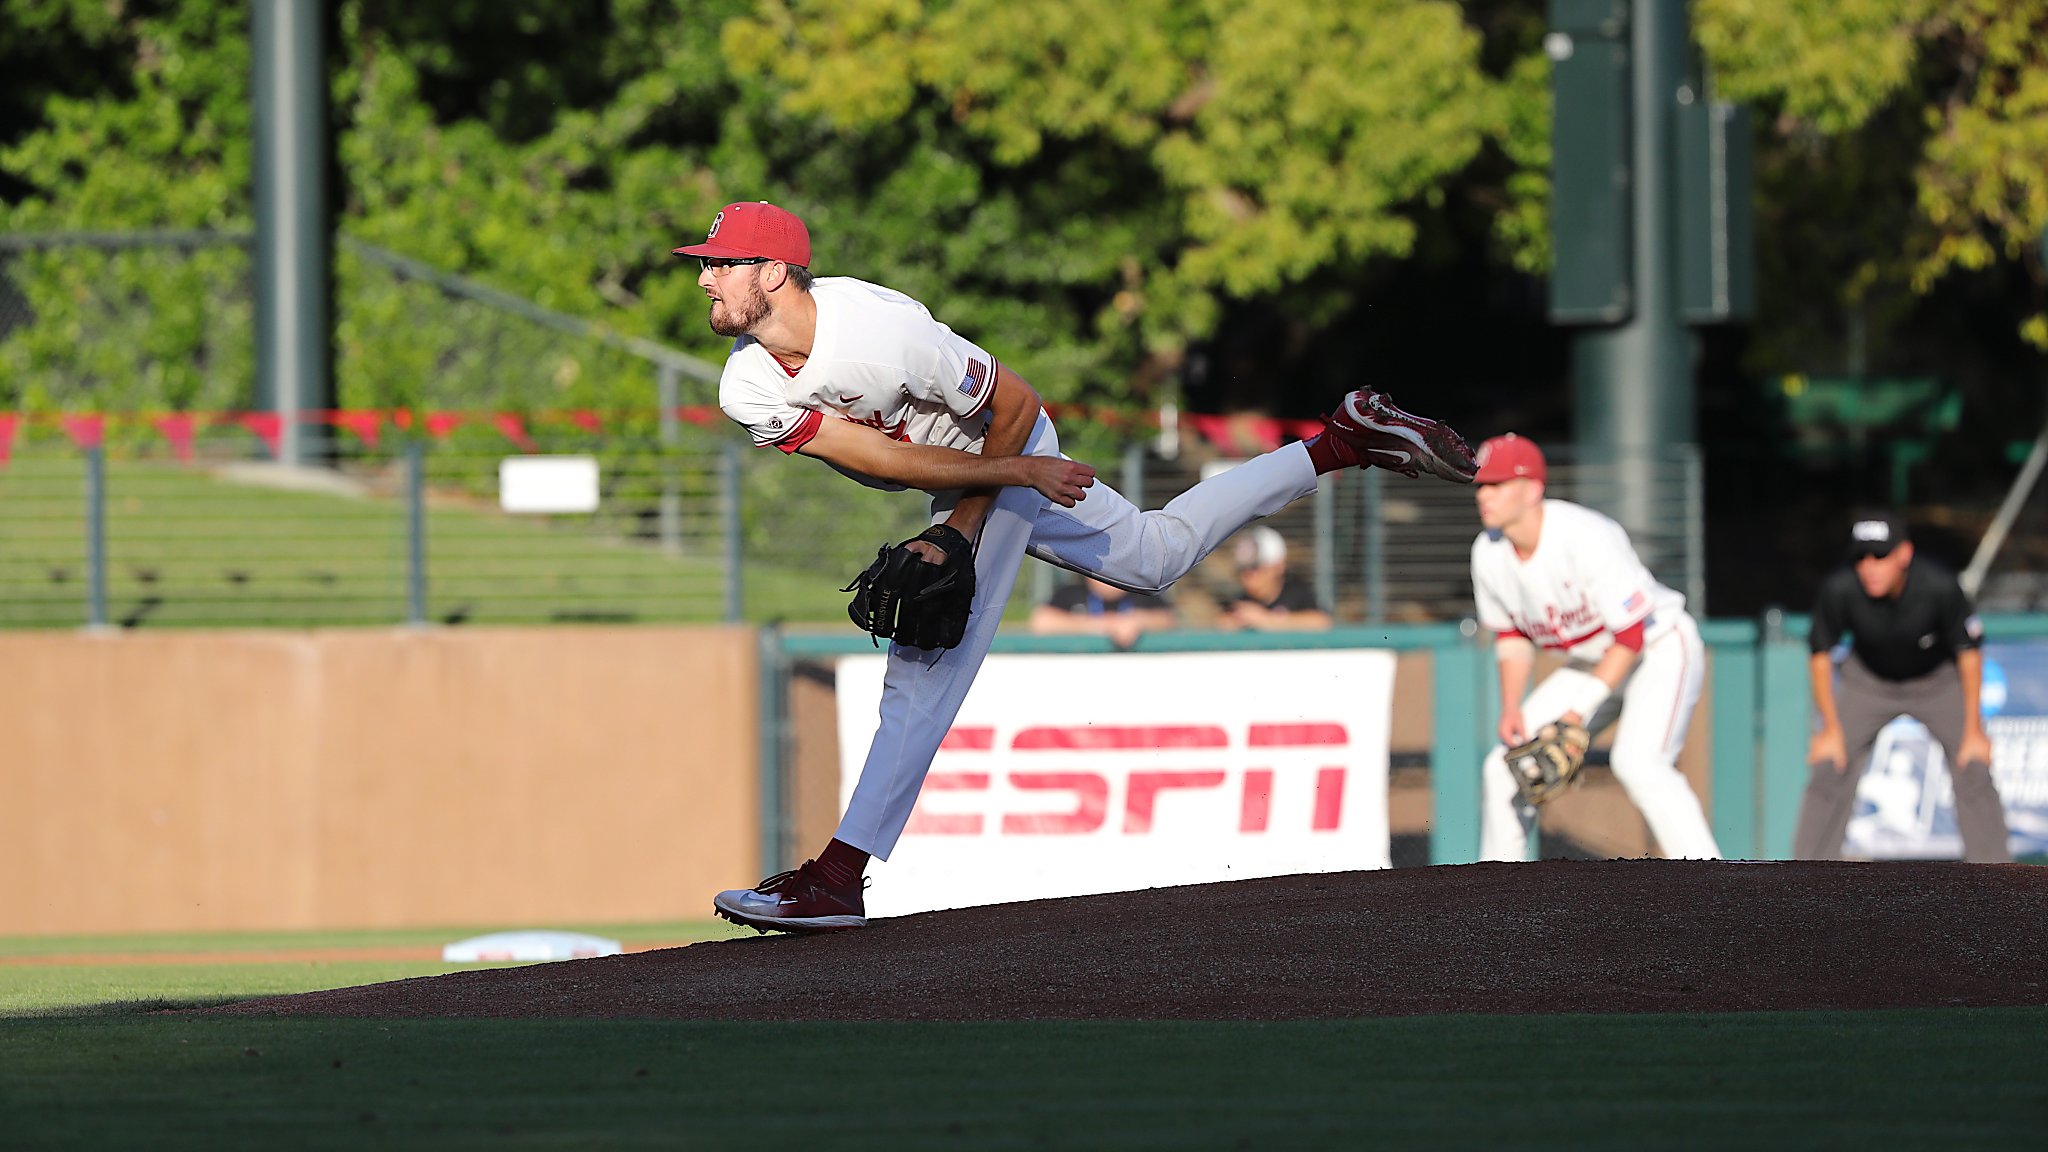 Stanford edges Wright State 4-3 in NCAA regional on Robinson’s double in 13th